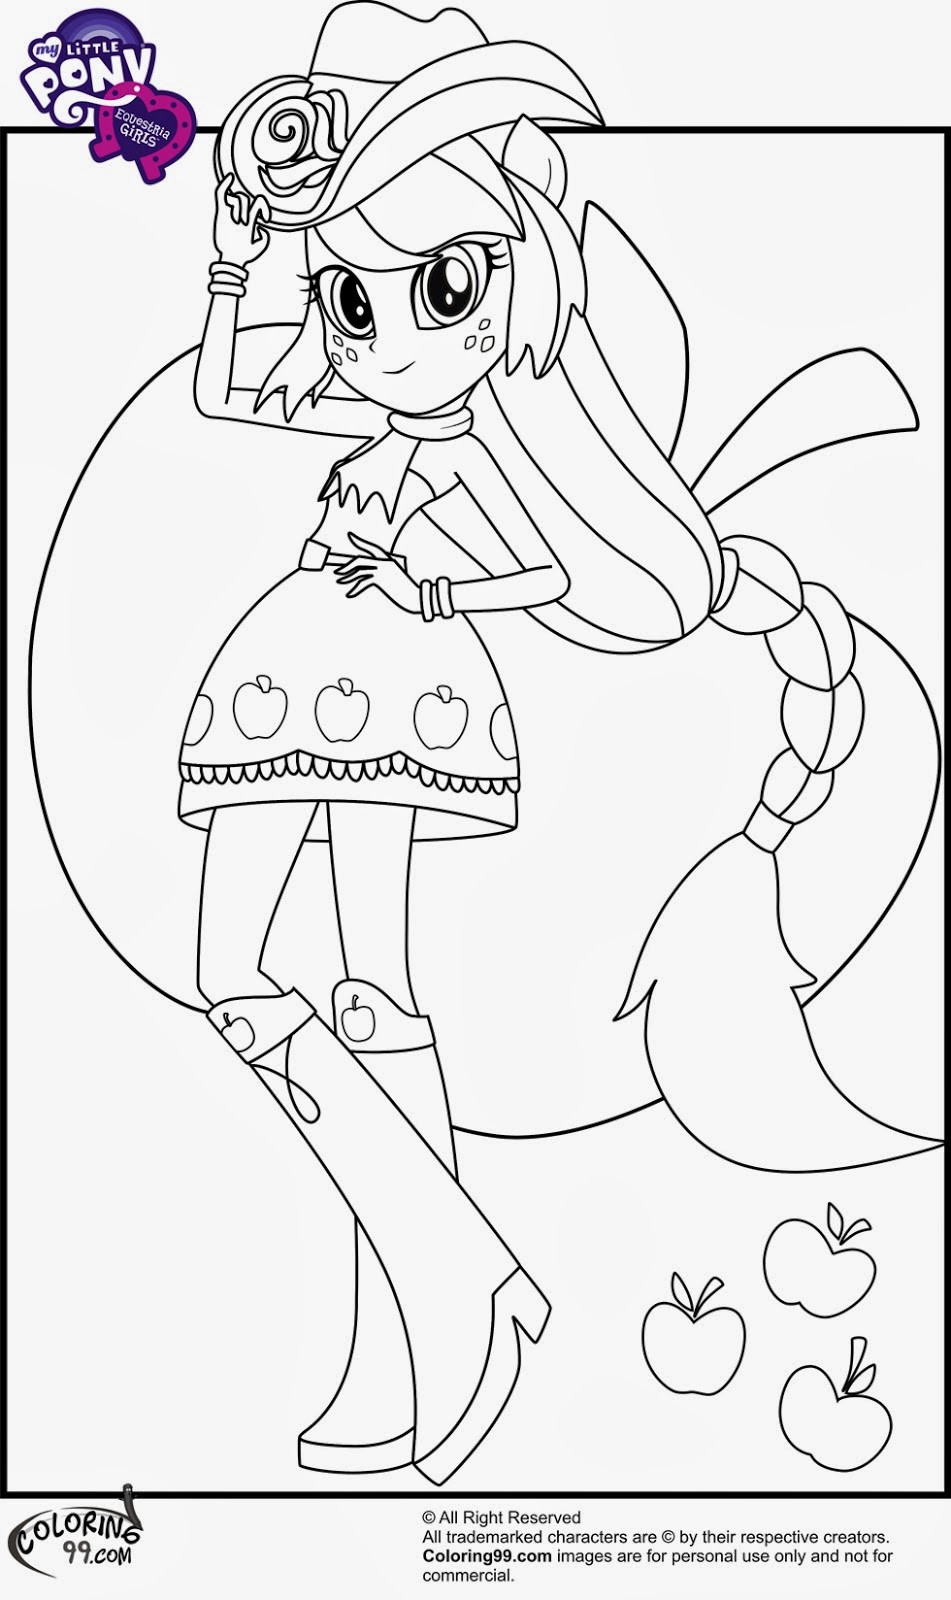 Mlp Equestria Girls Coloring Pages
 My Little Pony Equestria Girls Blog ¡¡Imágenes para